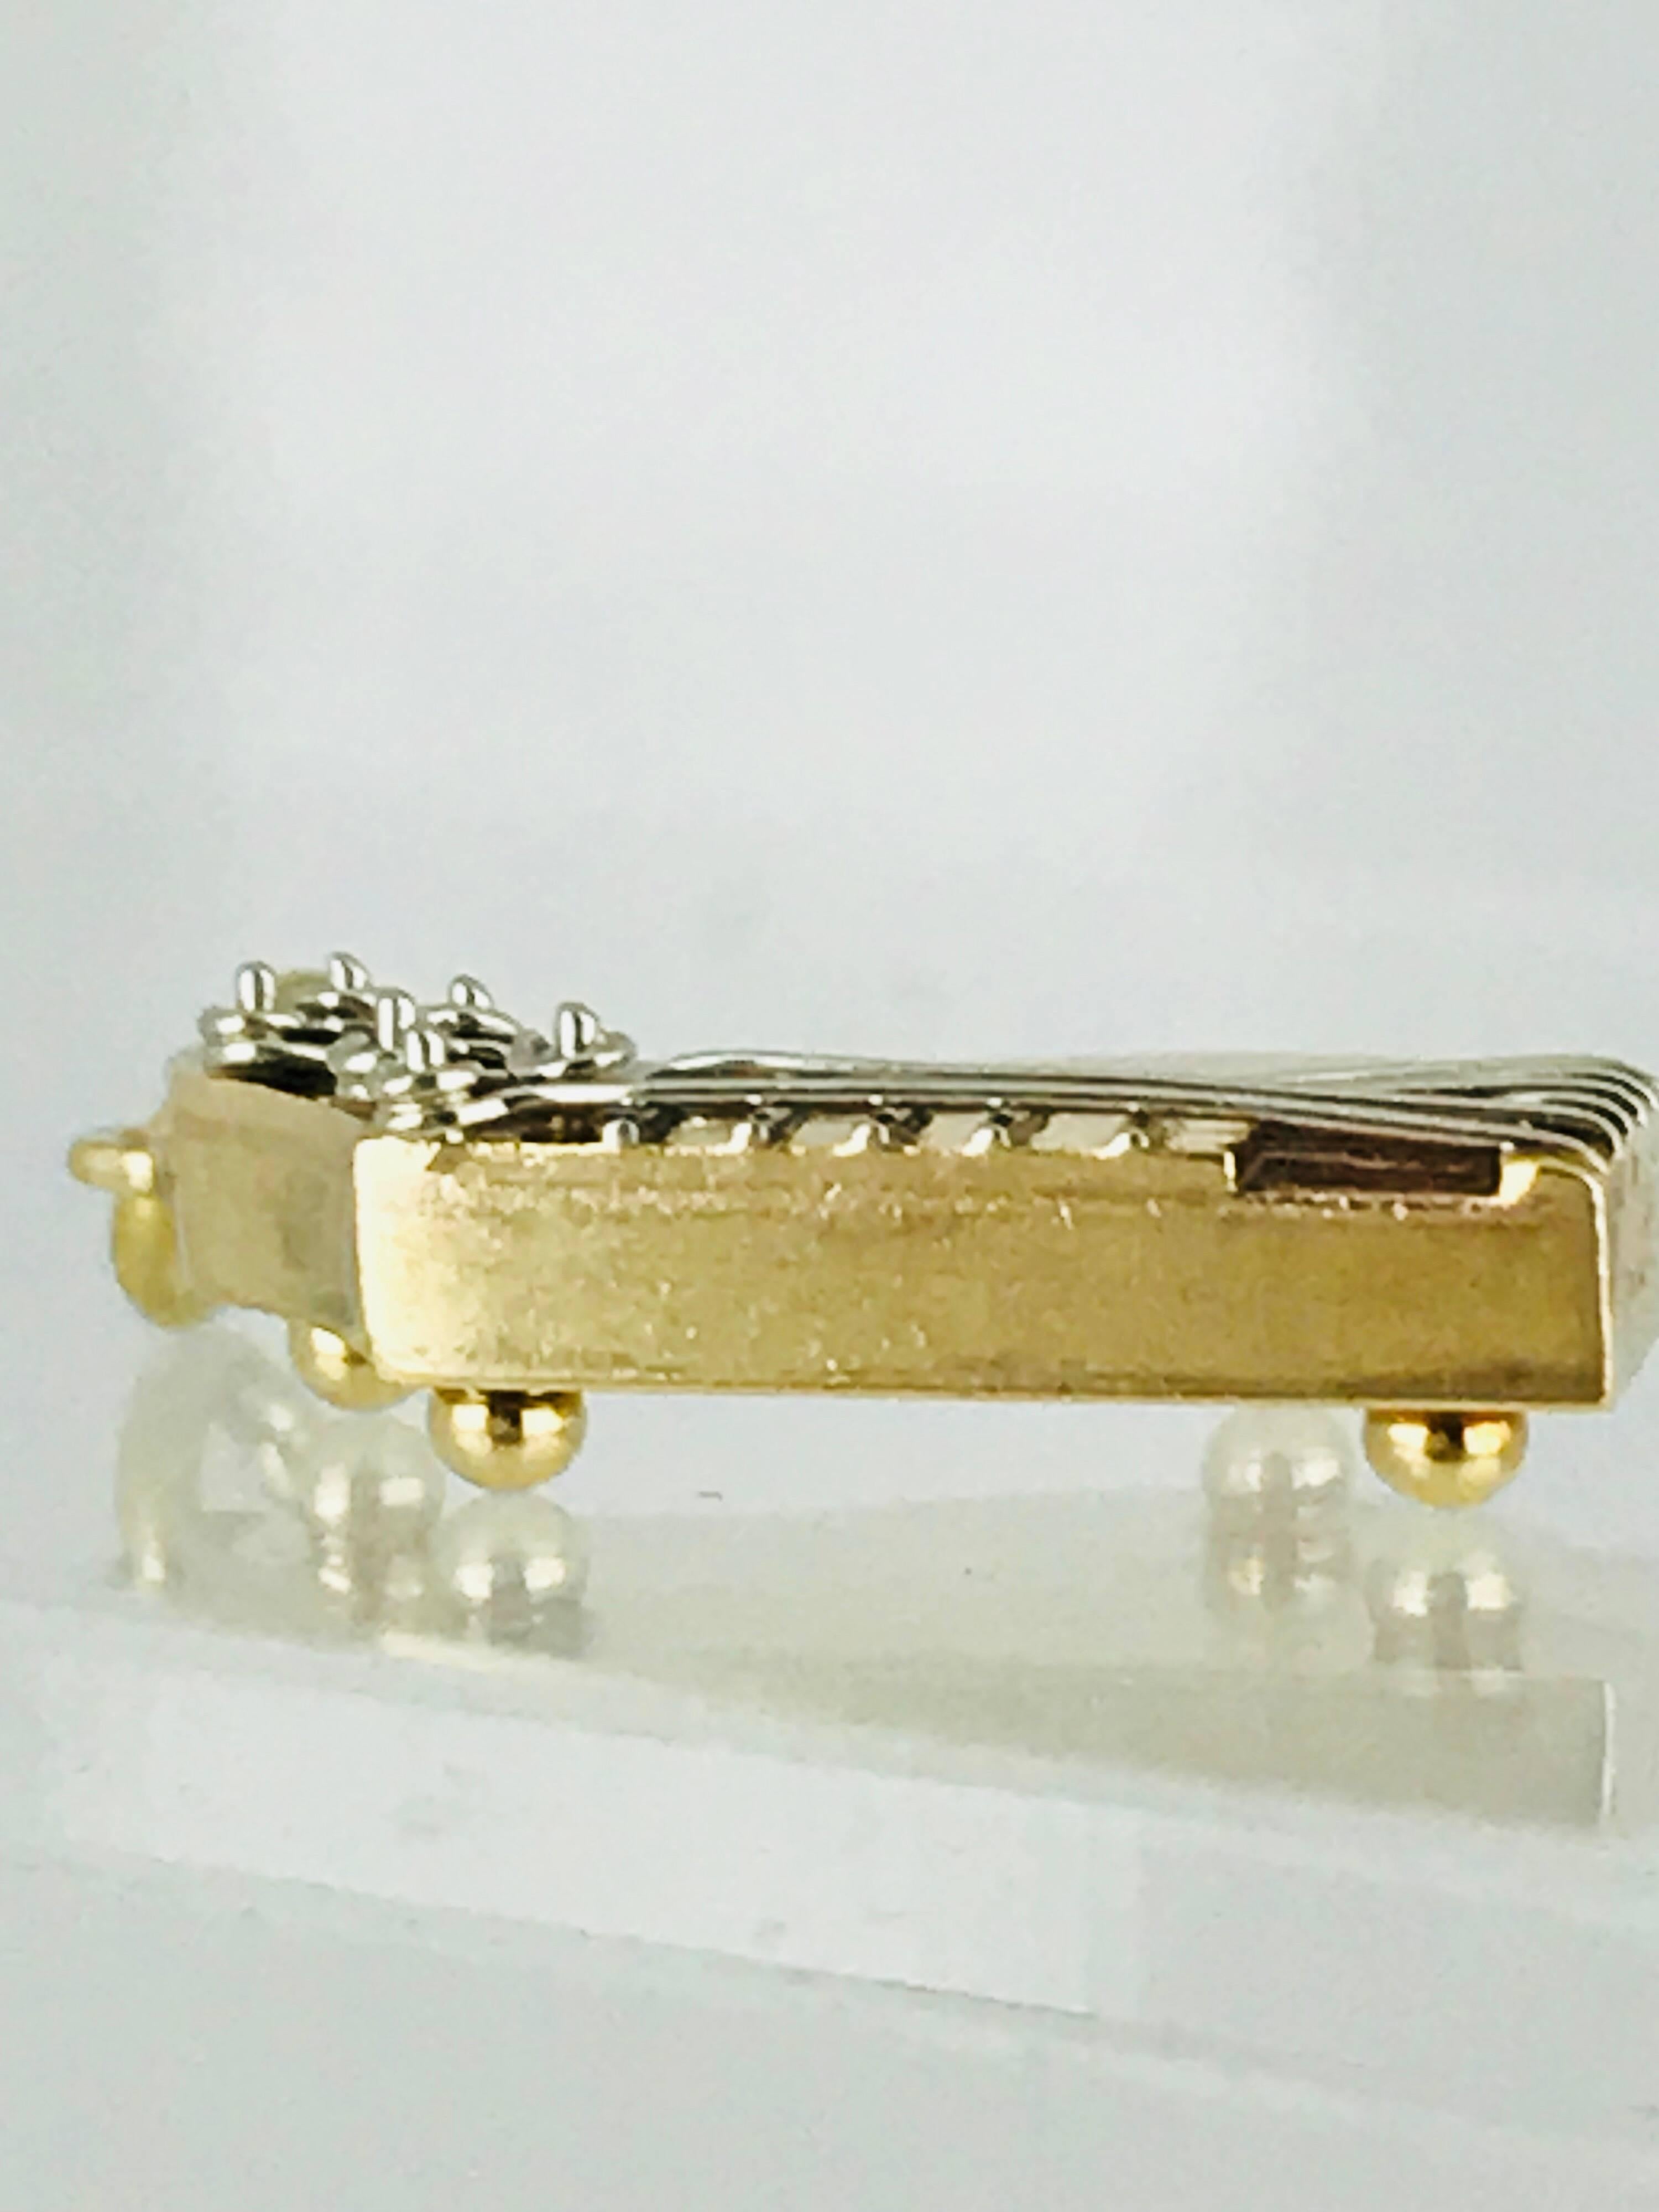 Modern Zither Musical Instrument, Charm, 18 Karat Yellow Gold with White Strings, Rare For Sale